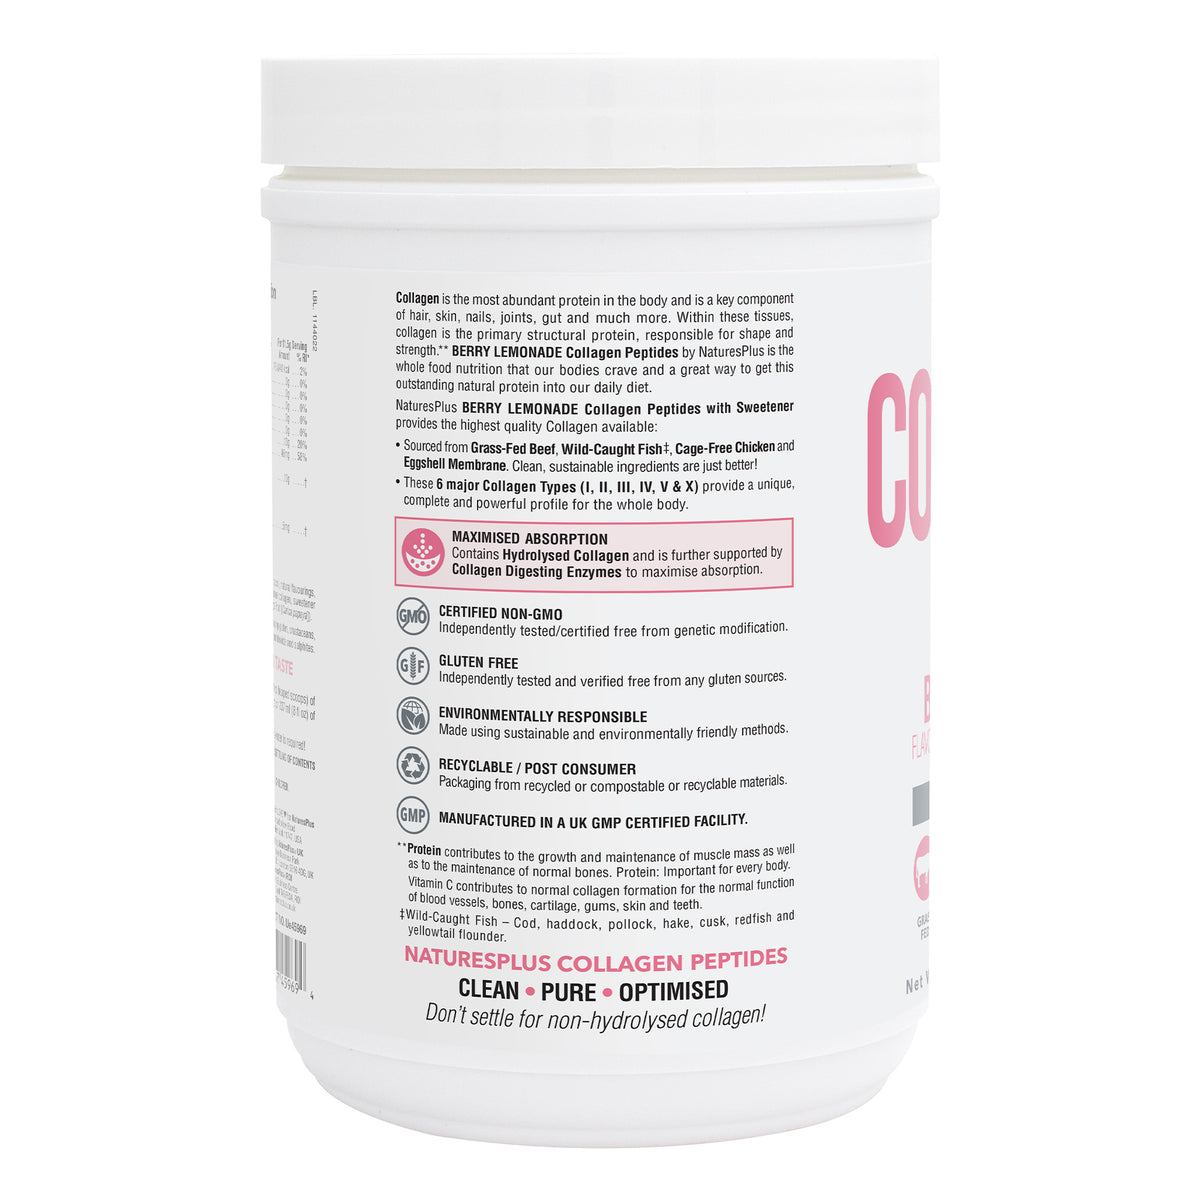 product image of Collagen Peptides Berry Lemonade containing Collagen Peptides Berry Lemonade